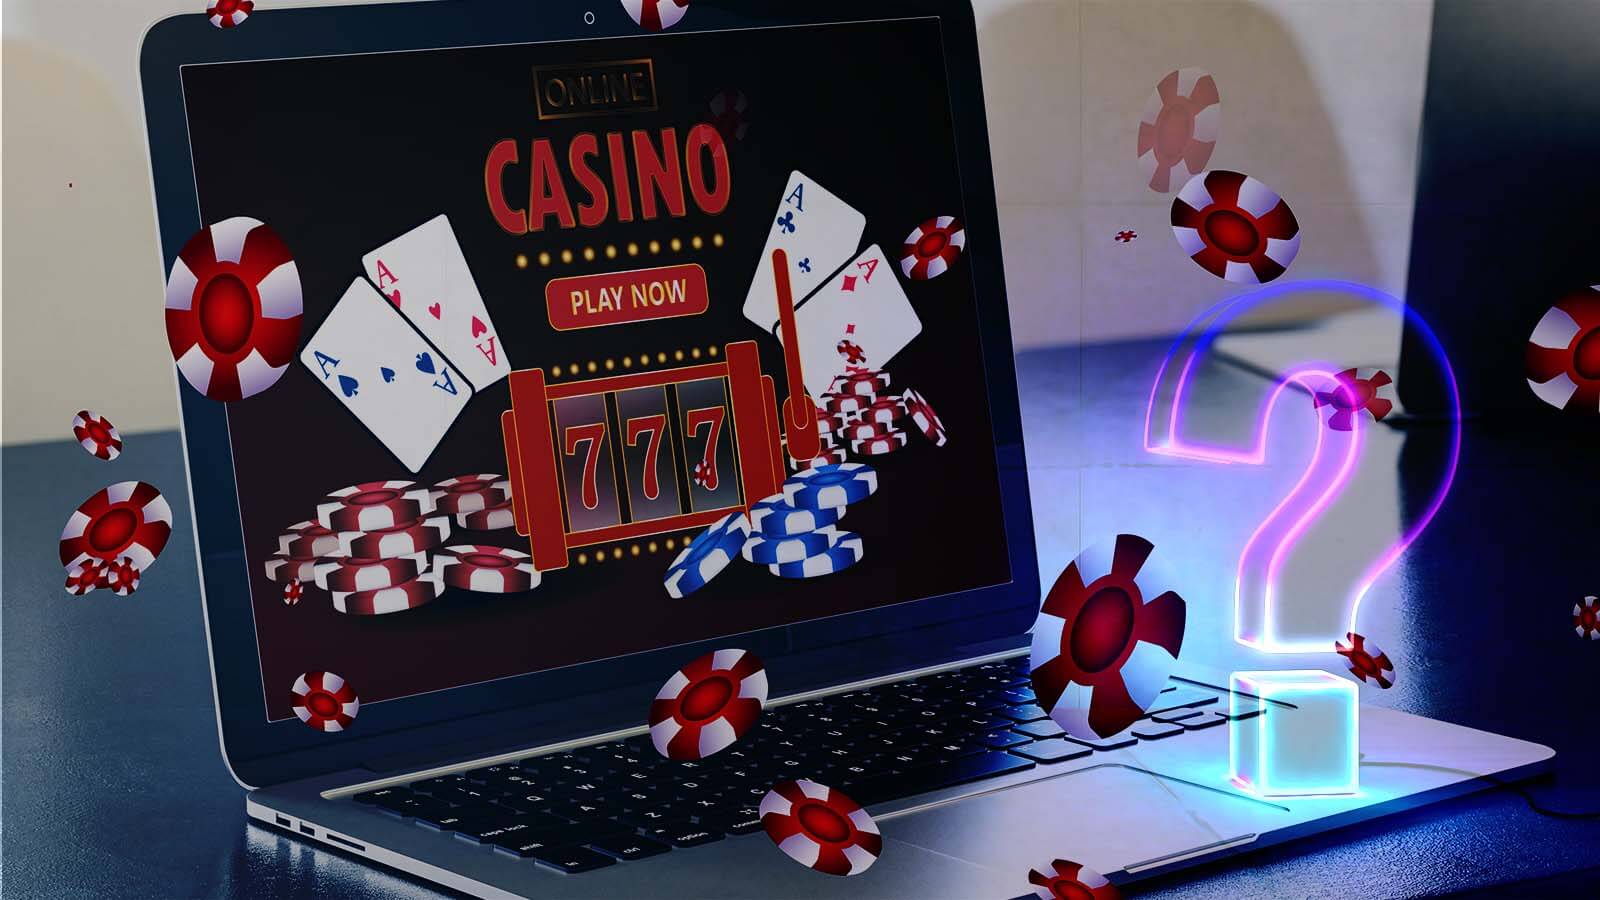 Why Choose a Casino's Website